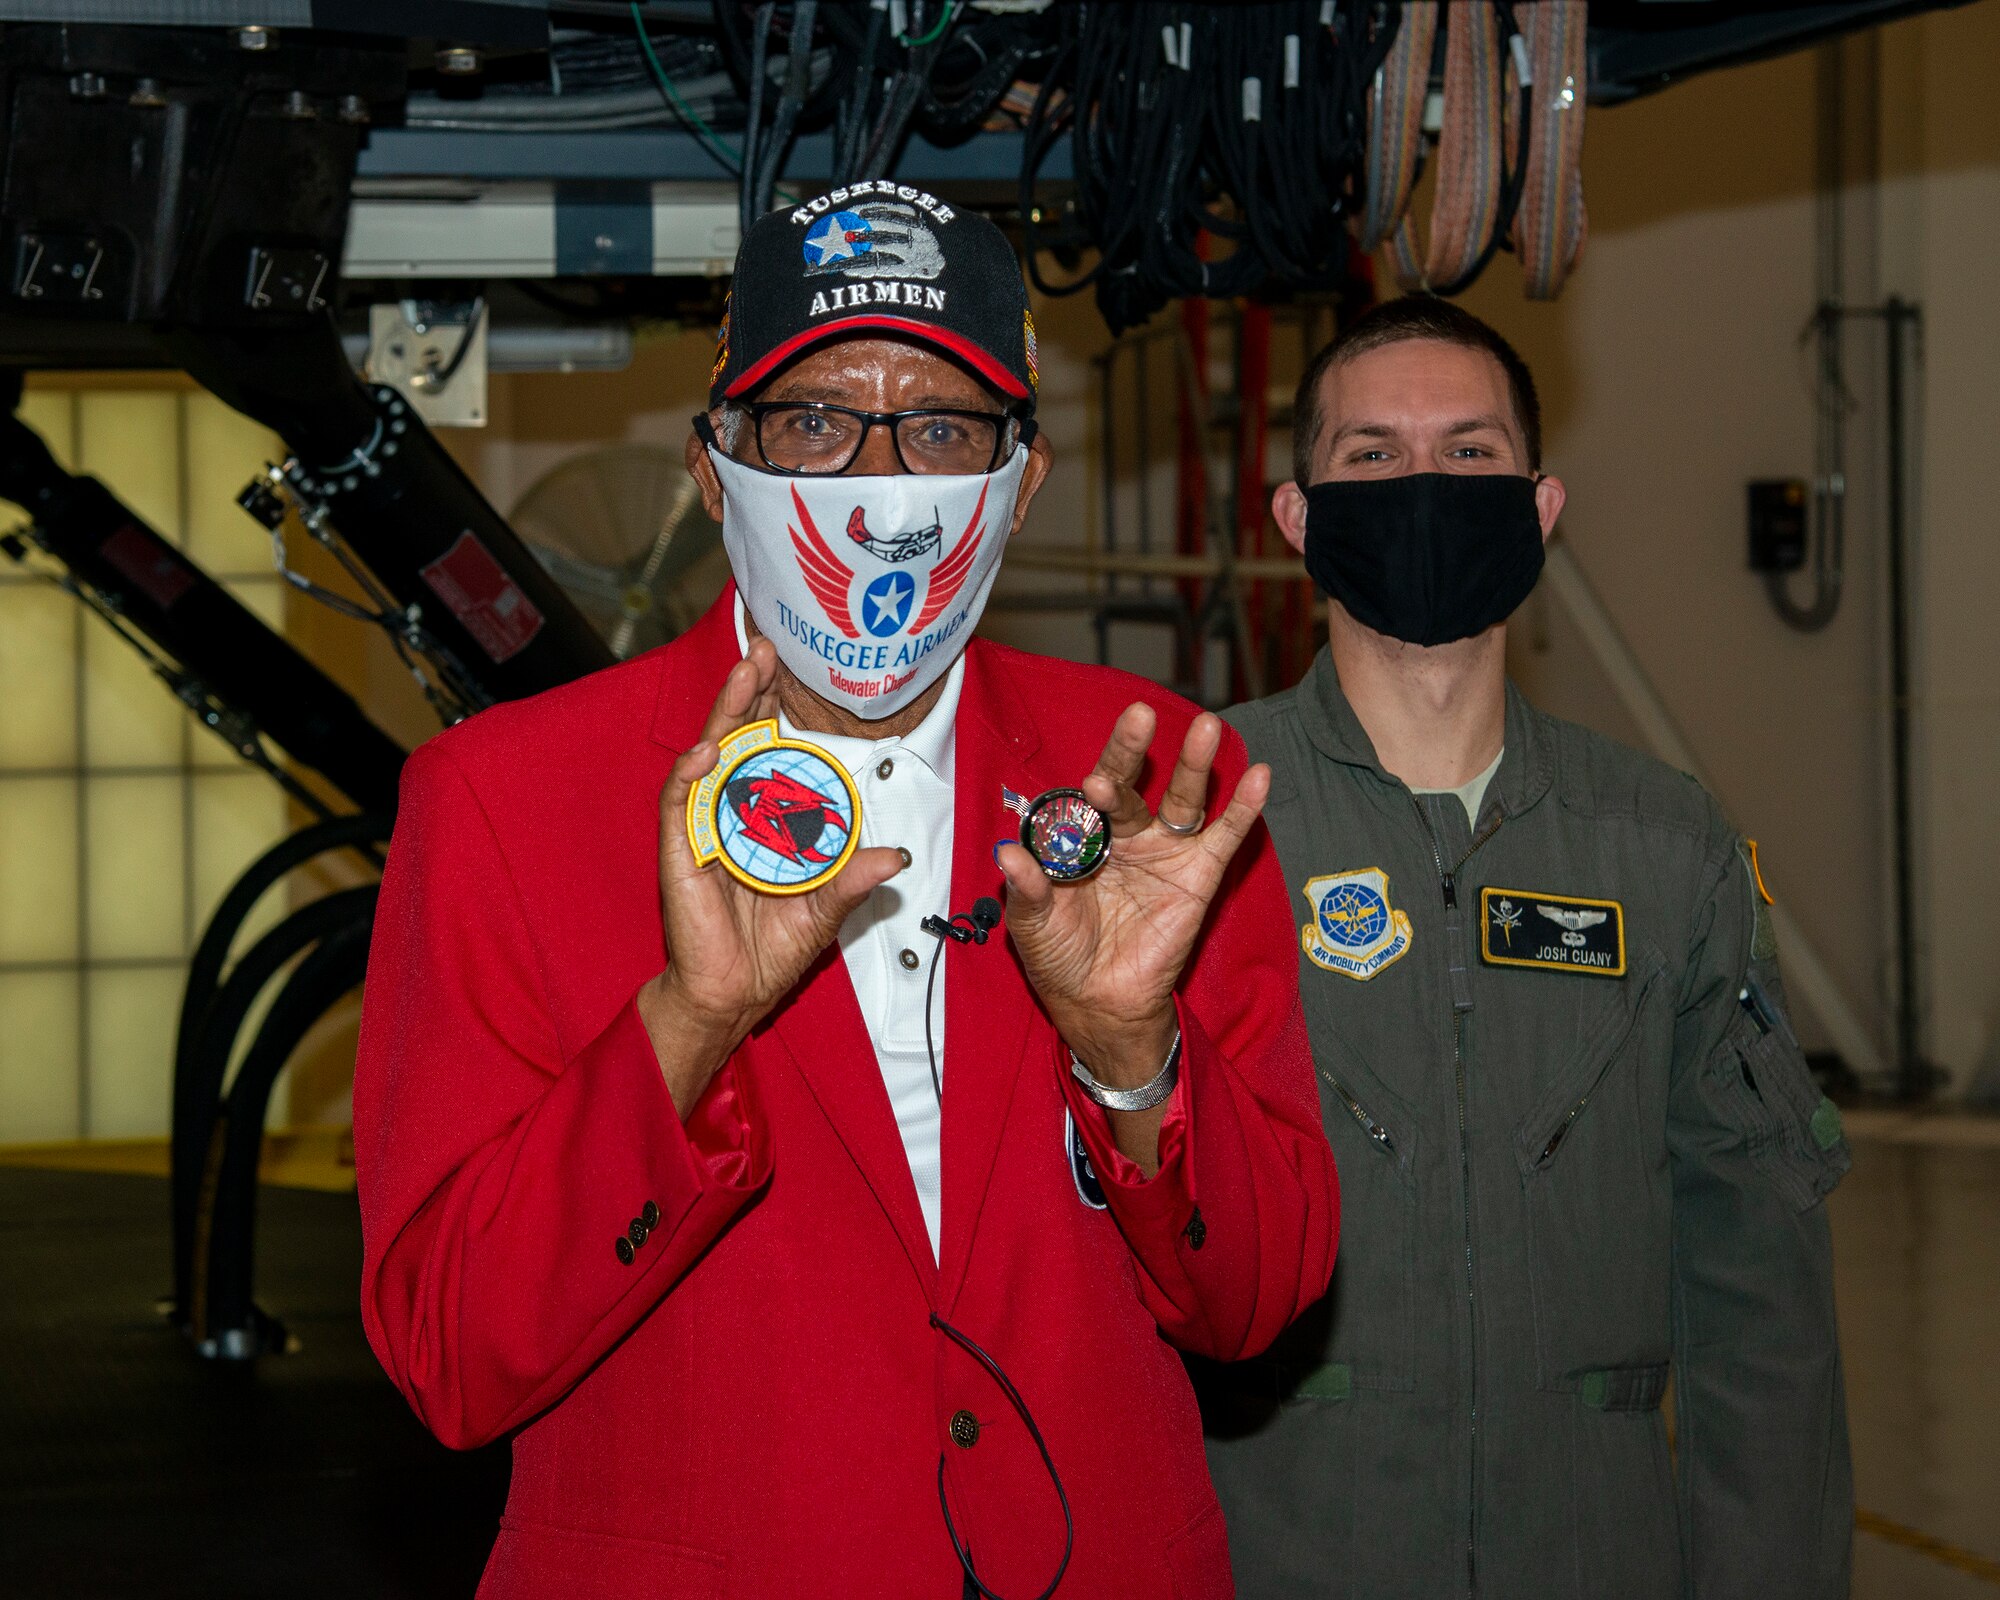 U.S. Army Air Forces Sgt. Thomas Newton, a Documented Original Tuskegee Airman, displays a 50th Air Refueling Squadron (ARS) patch and coin at MacDill Air Force Base, Fla., Nov. 10, 2020.